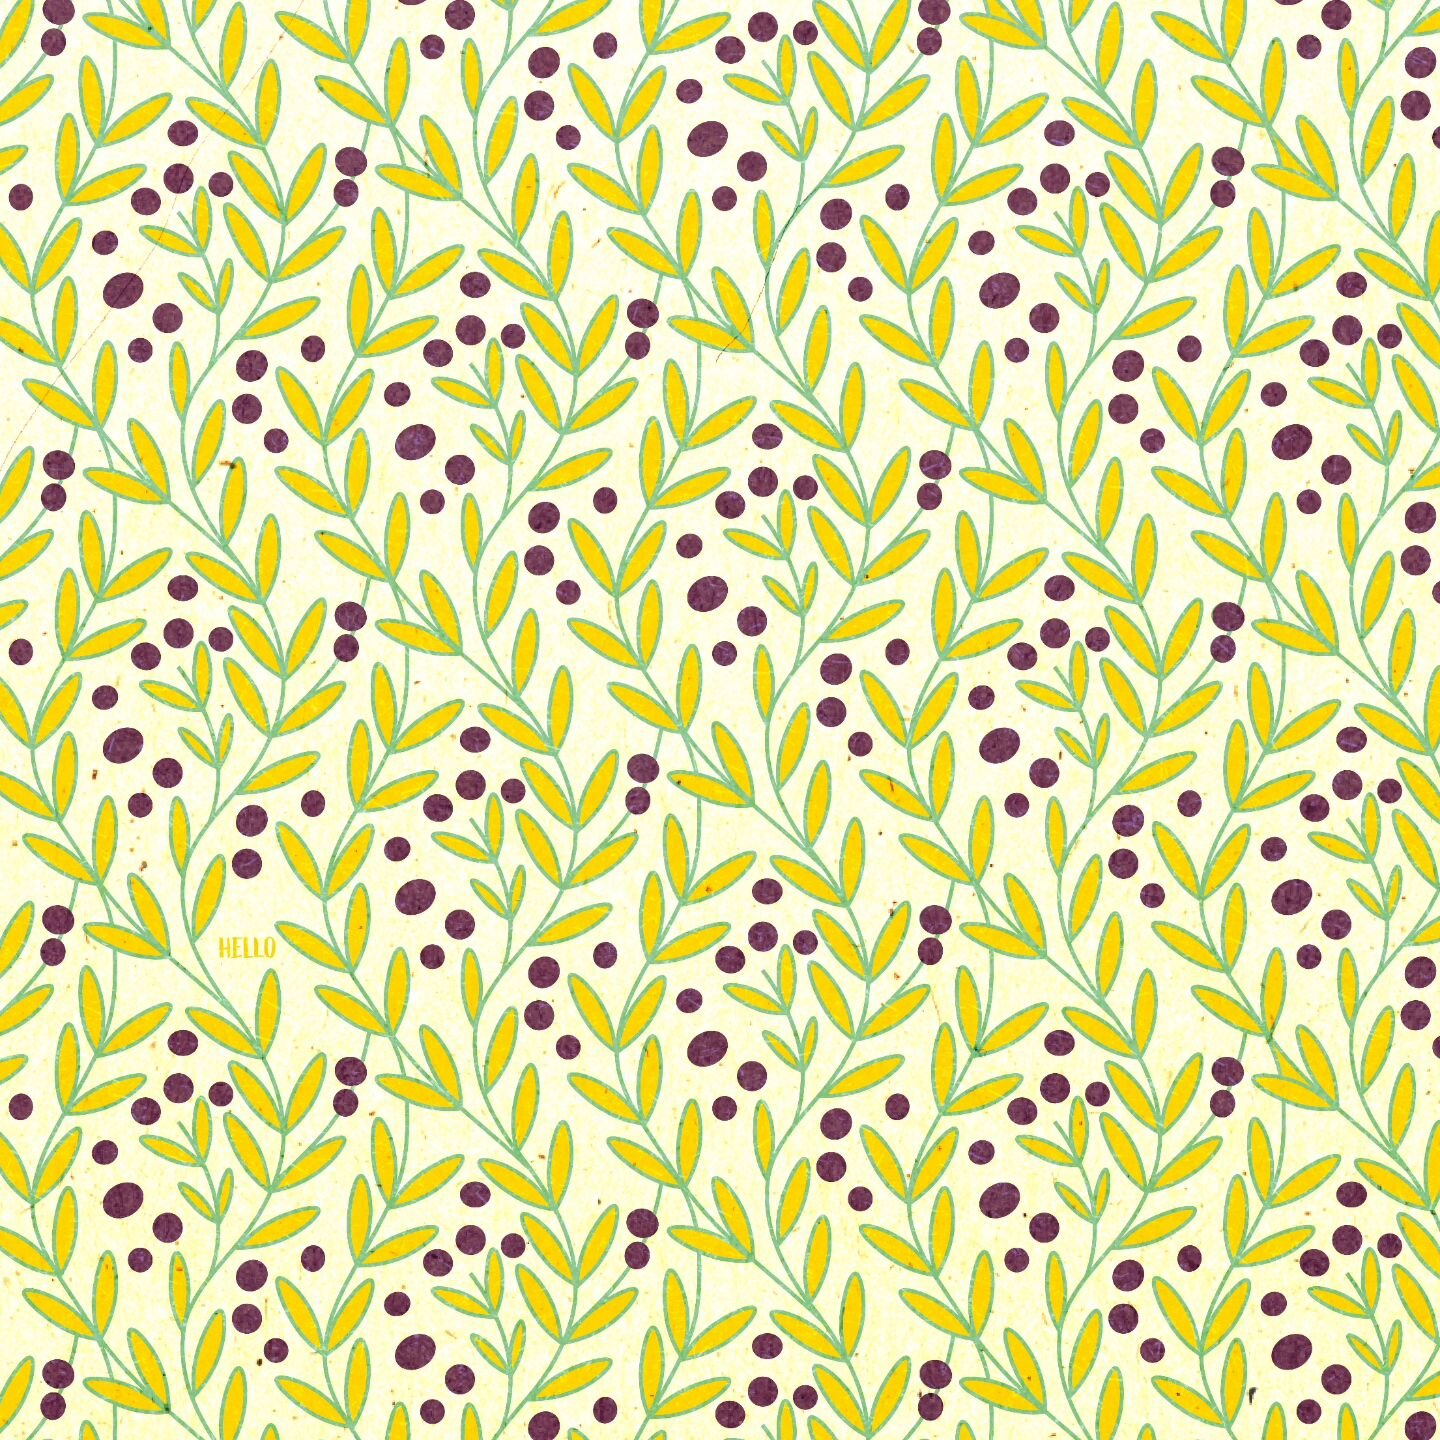 First pattern of 2024! 🌱

I've got tea towels on the brain lately - what do you think? Would you purchase a set?

Originally, I designed these floral patterns for Blue Owl Brewing's fruited sour beer packaging series, but these variations have some 